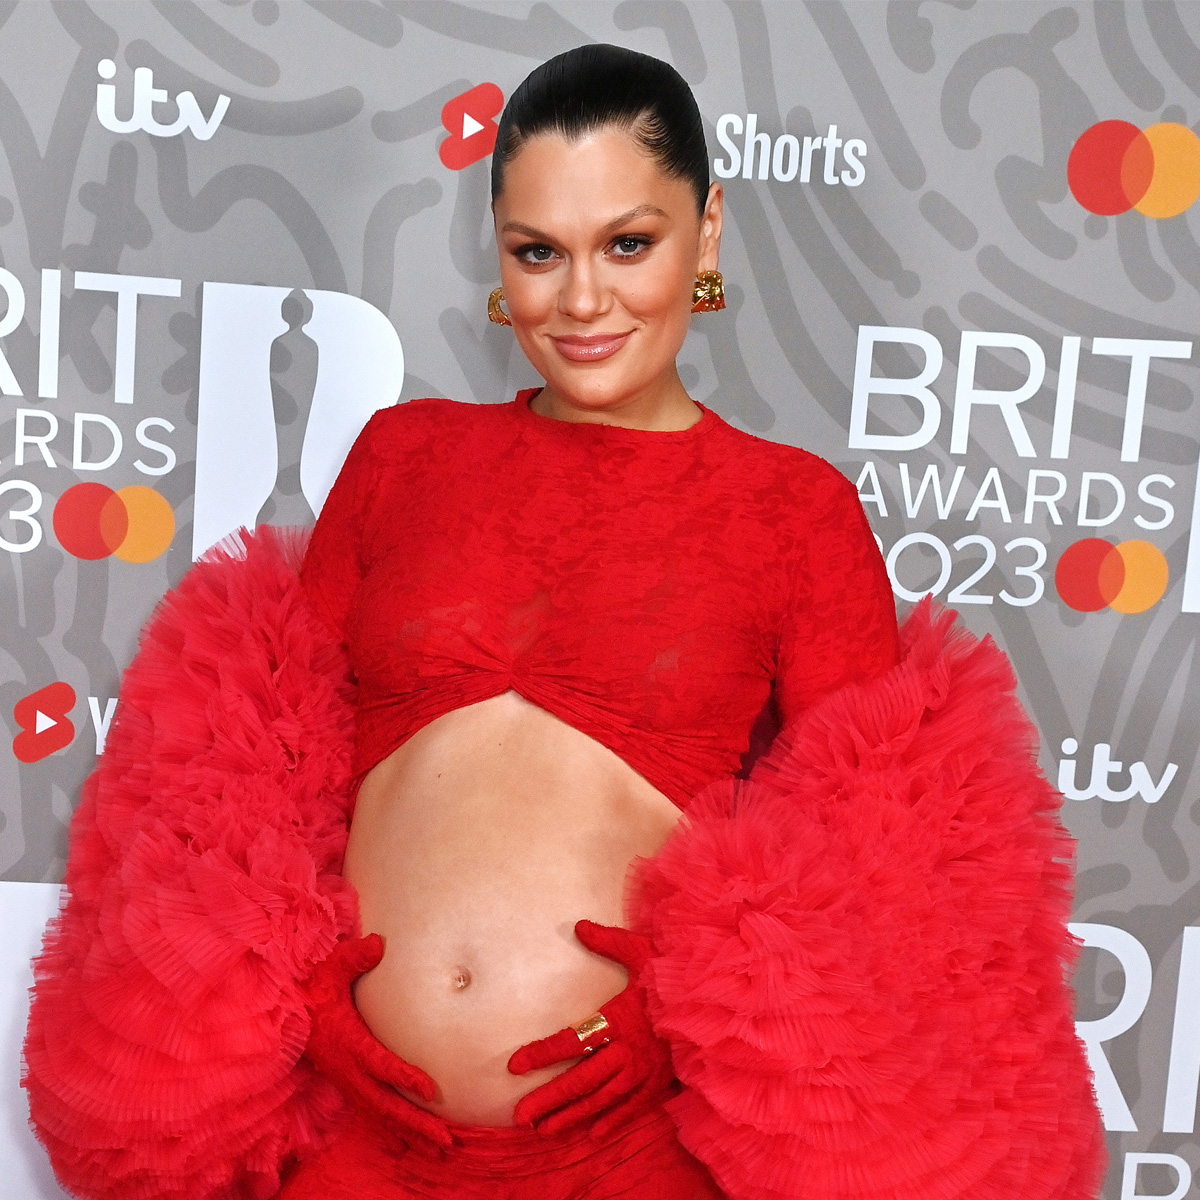 Pregnant Jessie J Reacts to Haters Calling Her Nude Pic Inappropriate